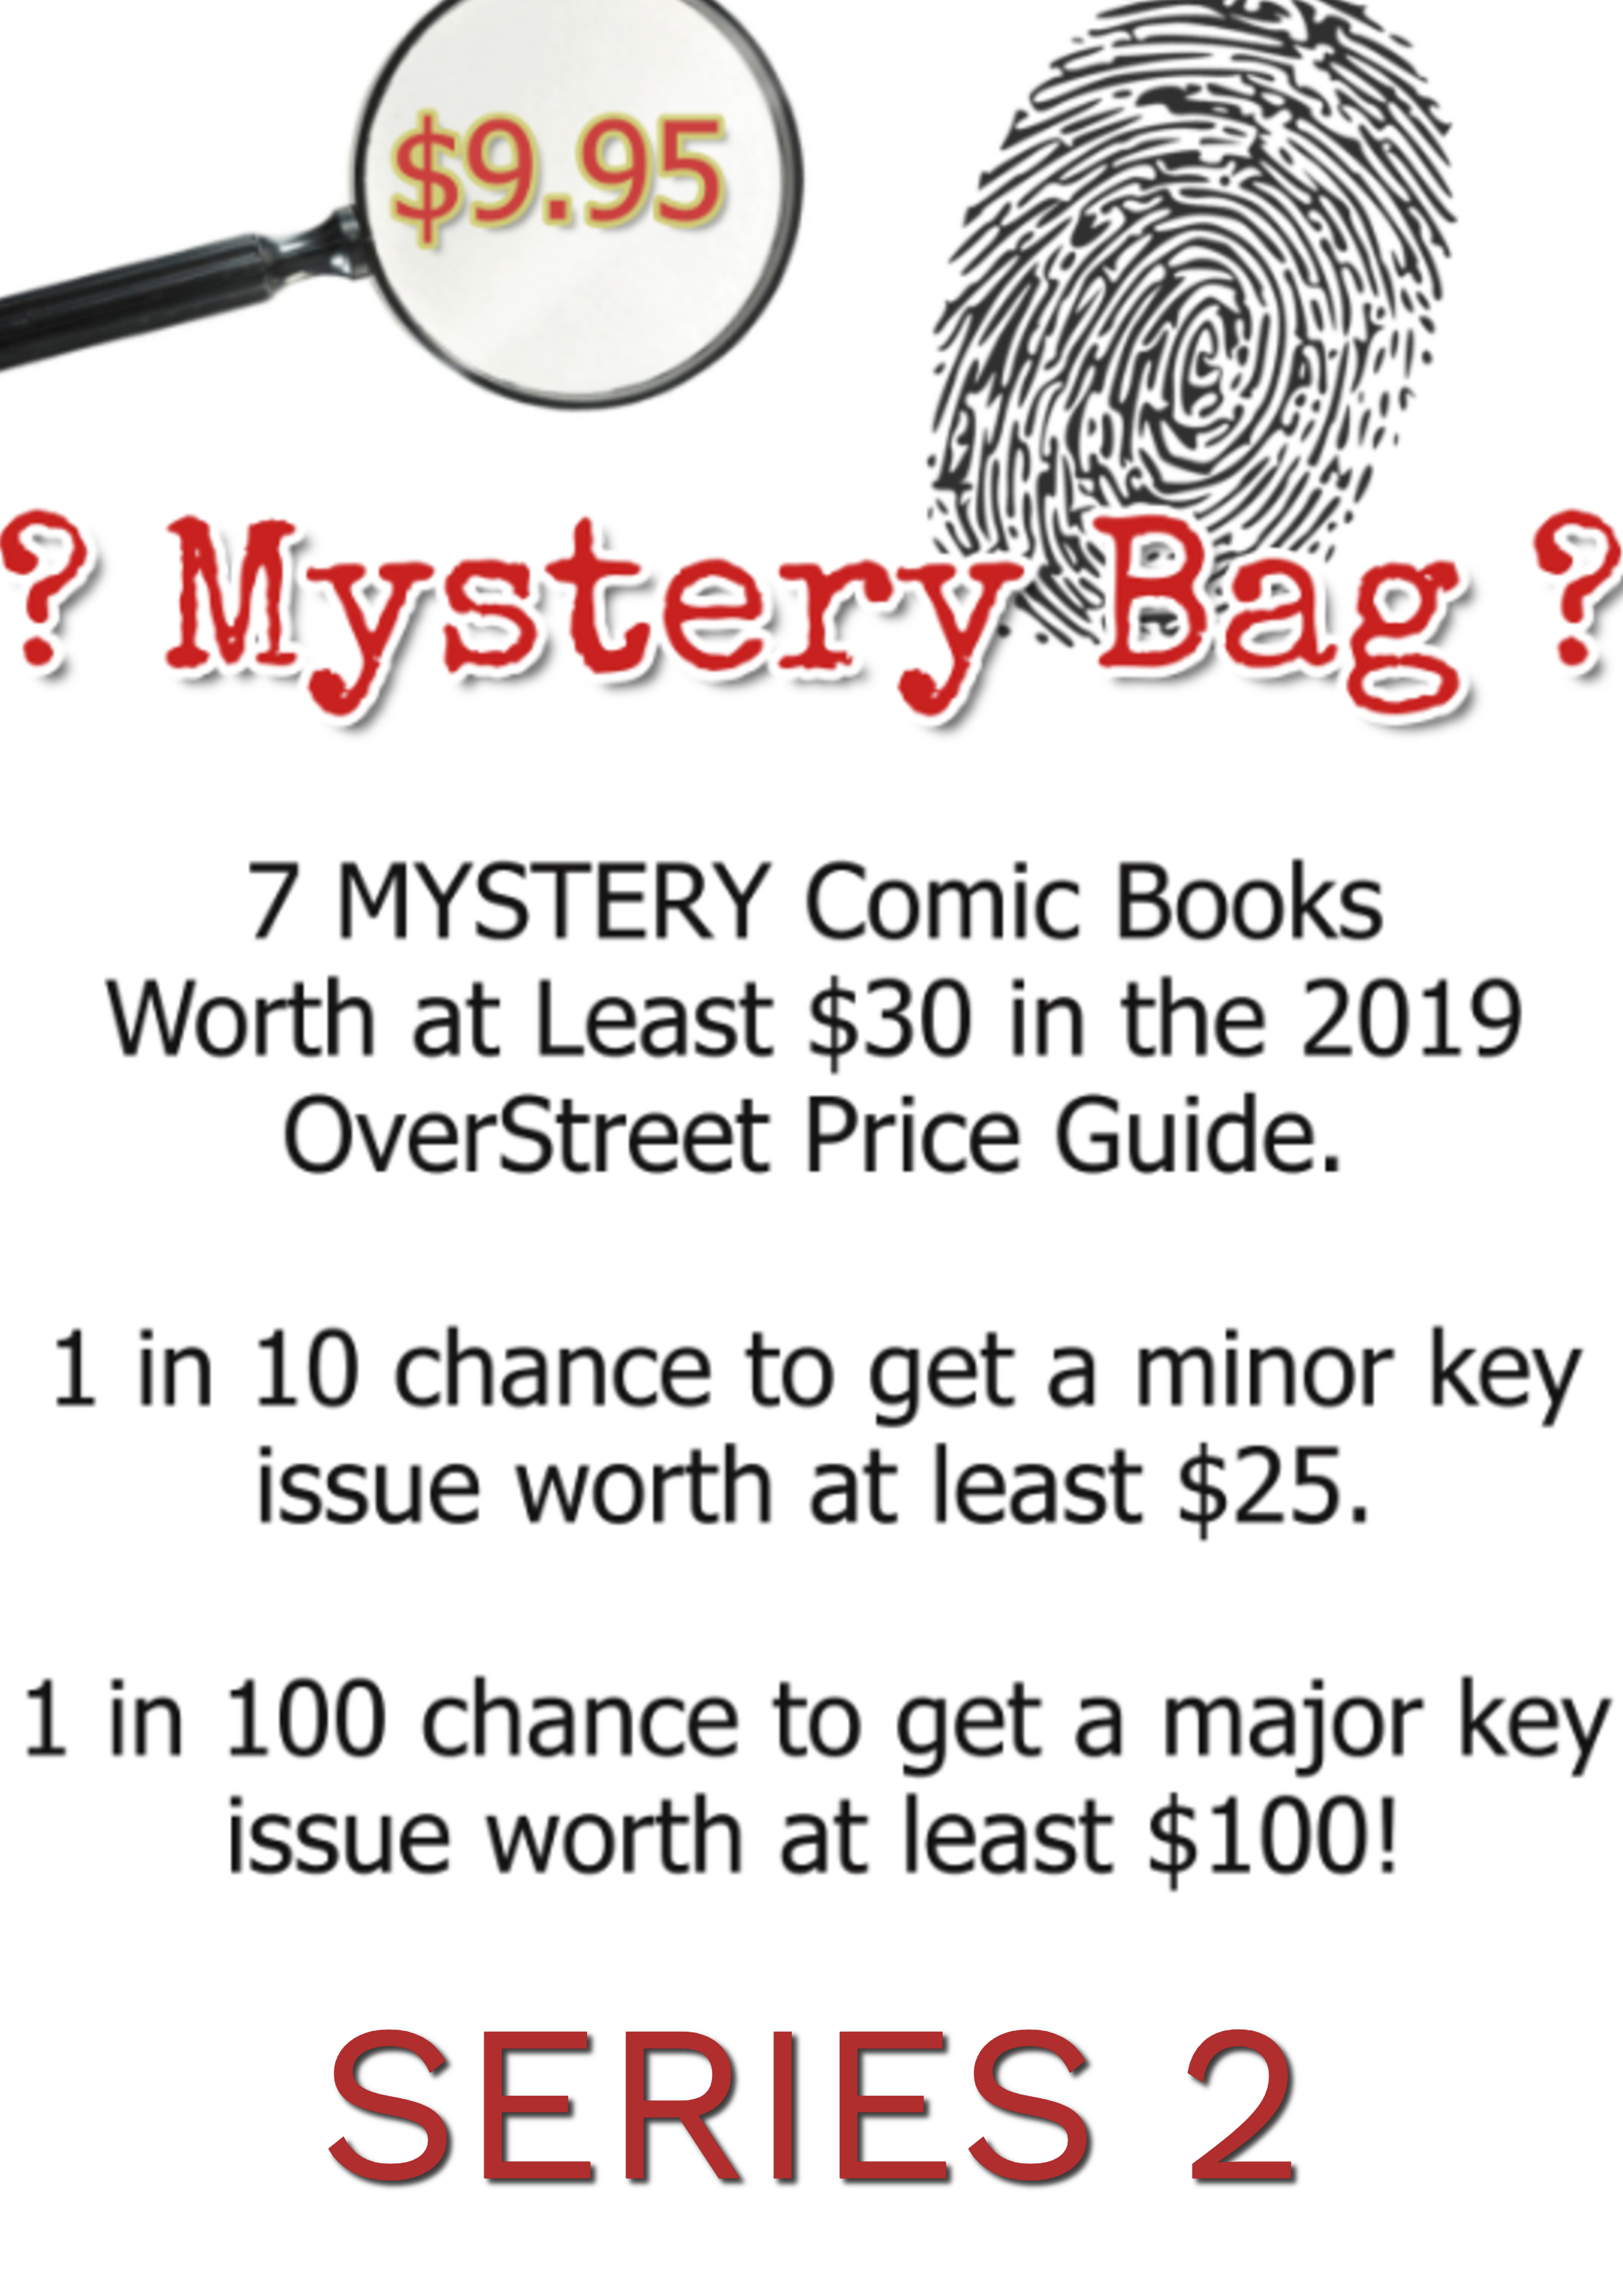 Comic Book Mystery Bags. 7 comics for $9.95 with a one in ten chance of a minor key issue and a 1 in 100 chance of a major key!